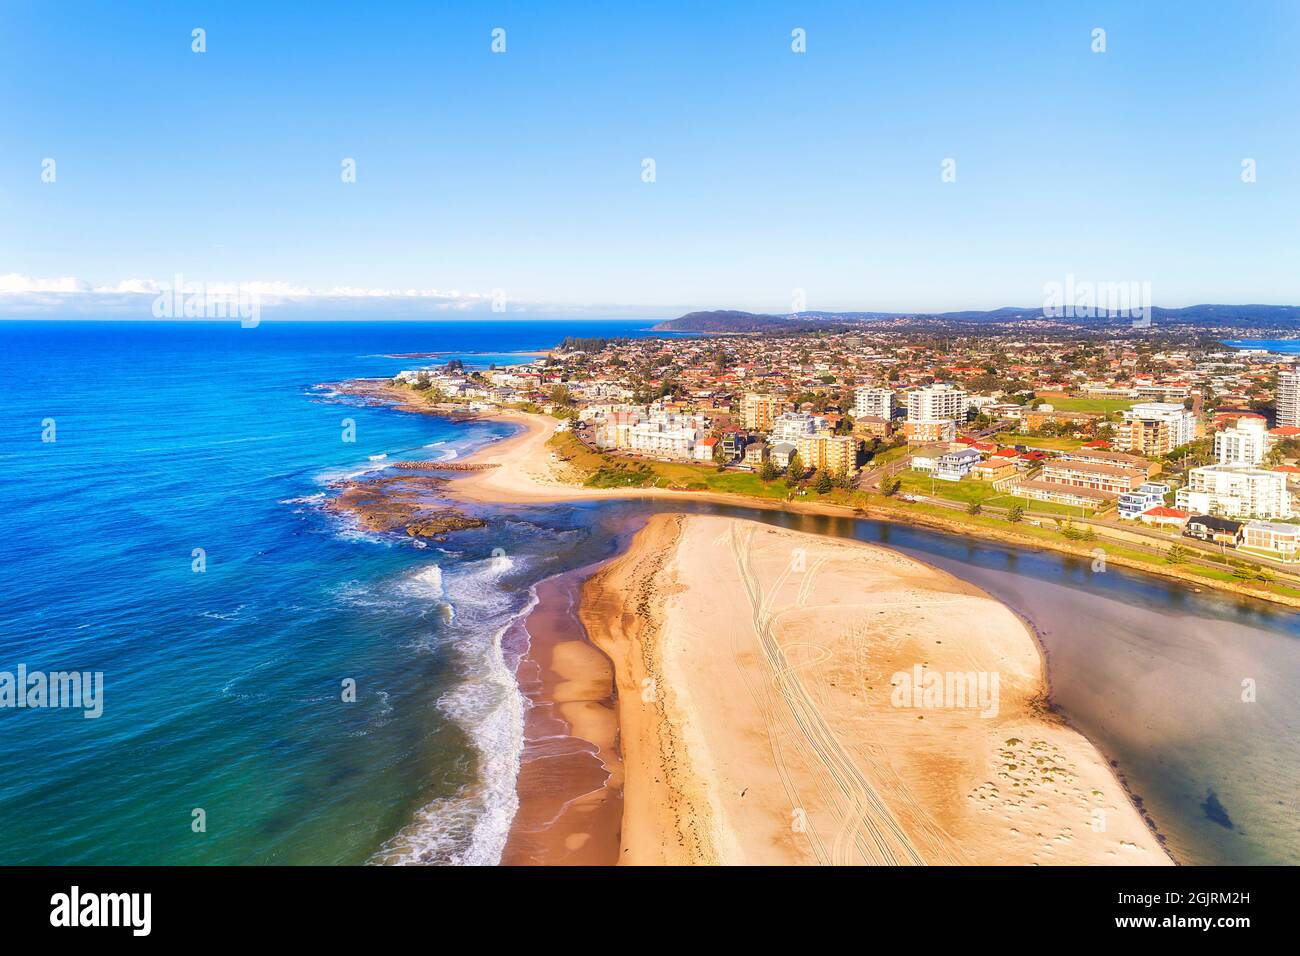 Residential houses and strata buildings on Pacific ocean shore of Australia in the Entrance - aerial view. Stock Photo